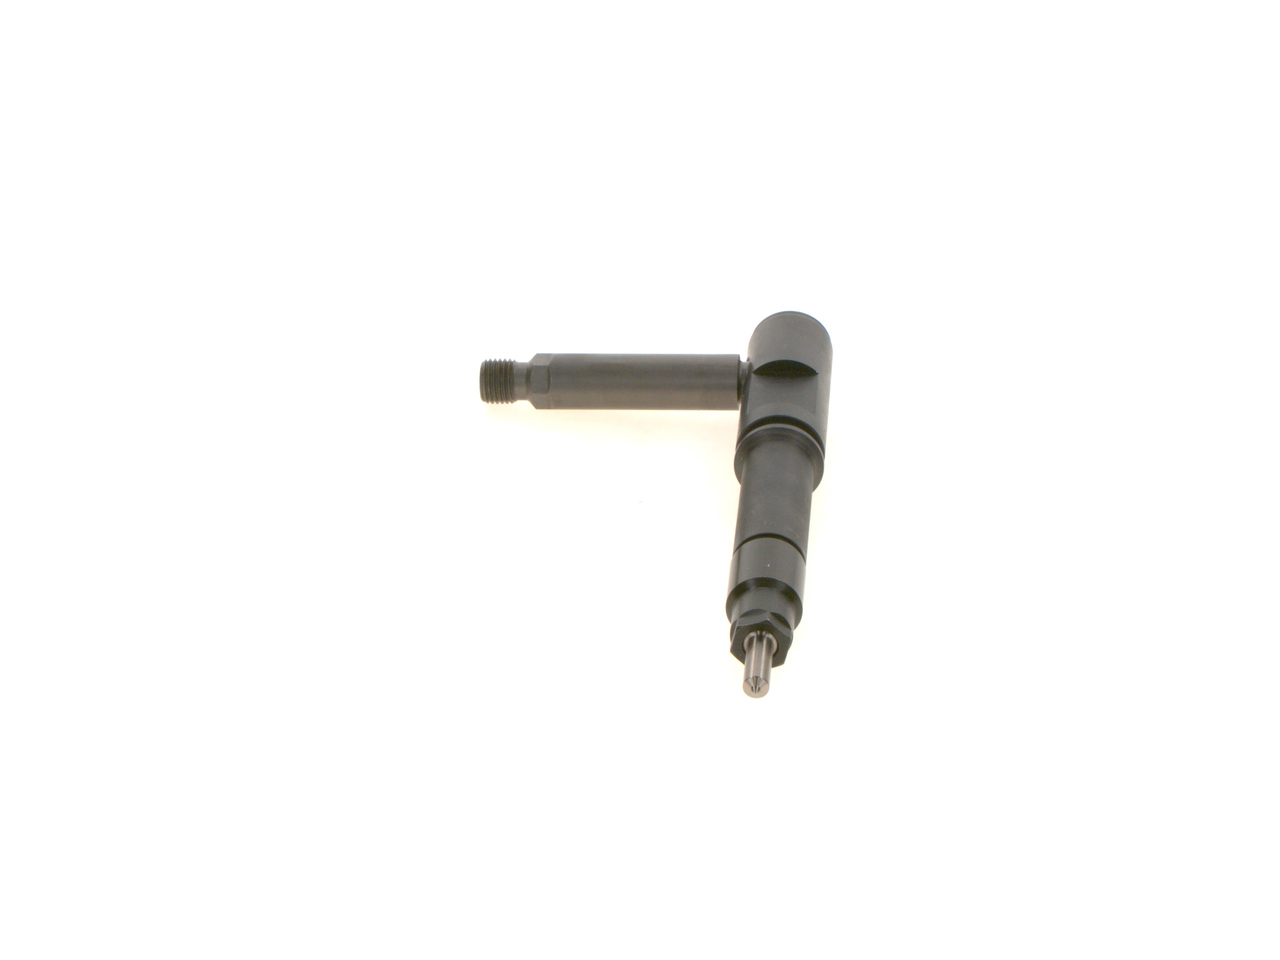 BOSCH 0 432 191 604 Nozzle and Holder Assembly